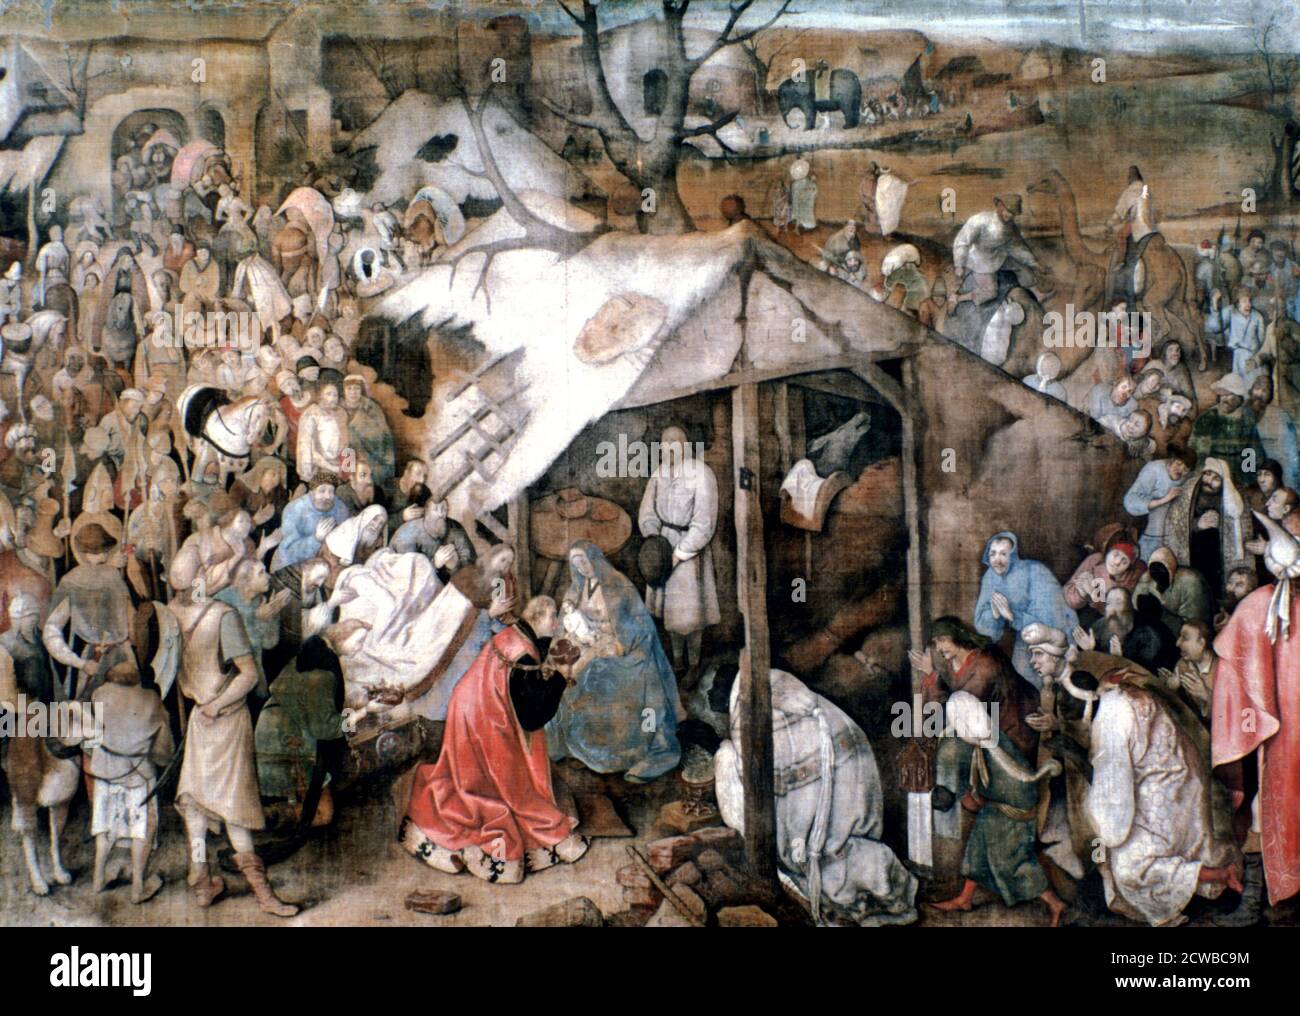 The Adoration of the Kings', c1556-1562, by Pieter Bruegel the Elder. The Three Kings presenting their gifts are treated as caricatures and the Virgin is not idealised. From the collection of the Musees Royaux des Beaux Arts de Belgique, Brussels, Belgium. Stock Photo